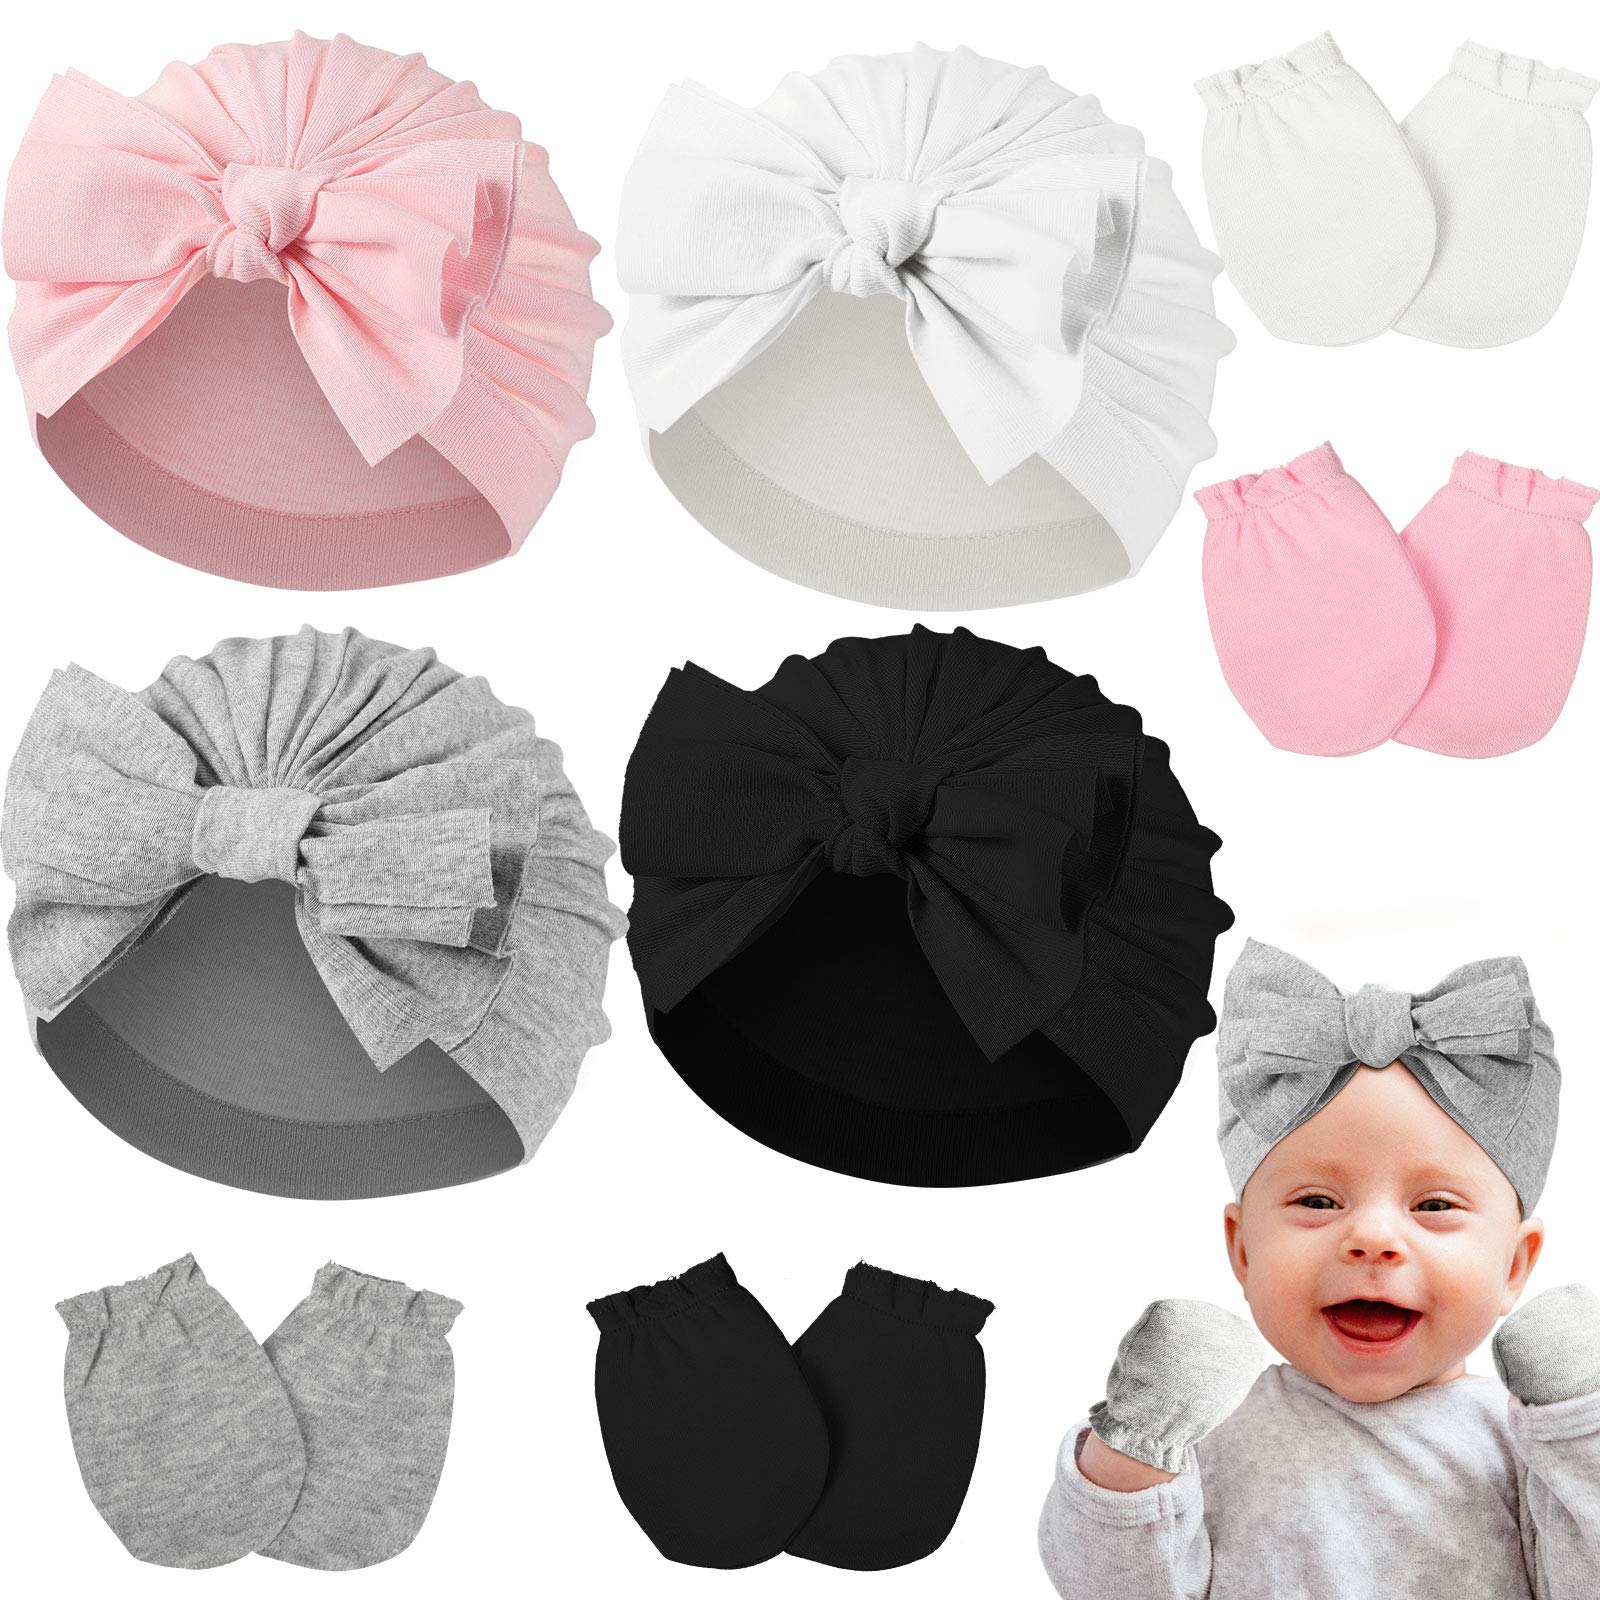 Newborn Girl Turban Hat Gloves Set, Include 4 Pieces Infant Girls Headwraps Toddler Hats and 4 Pairs Infant No Scratch Mittens Gloves (Bowknot Style)